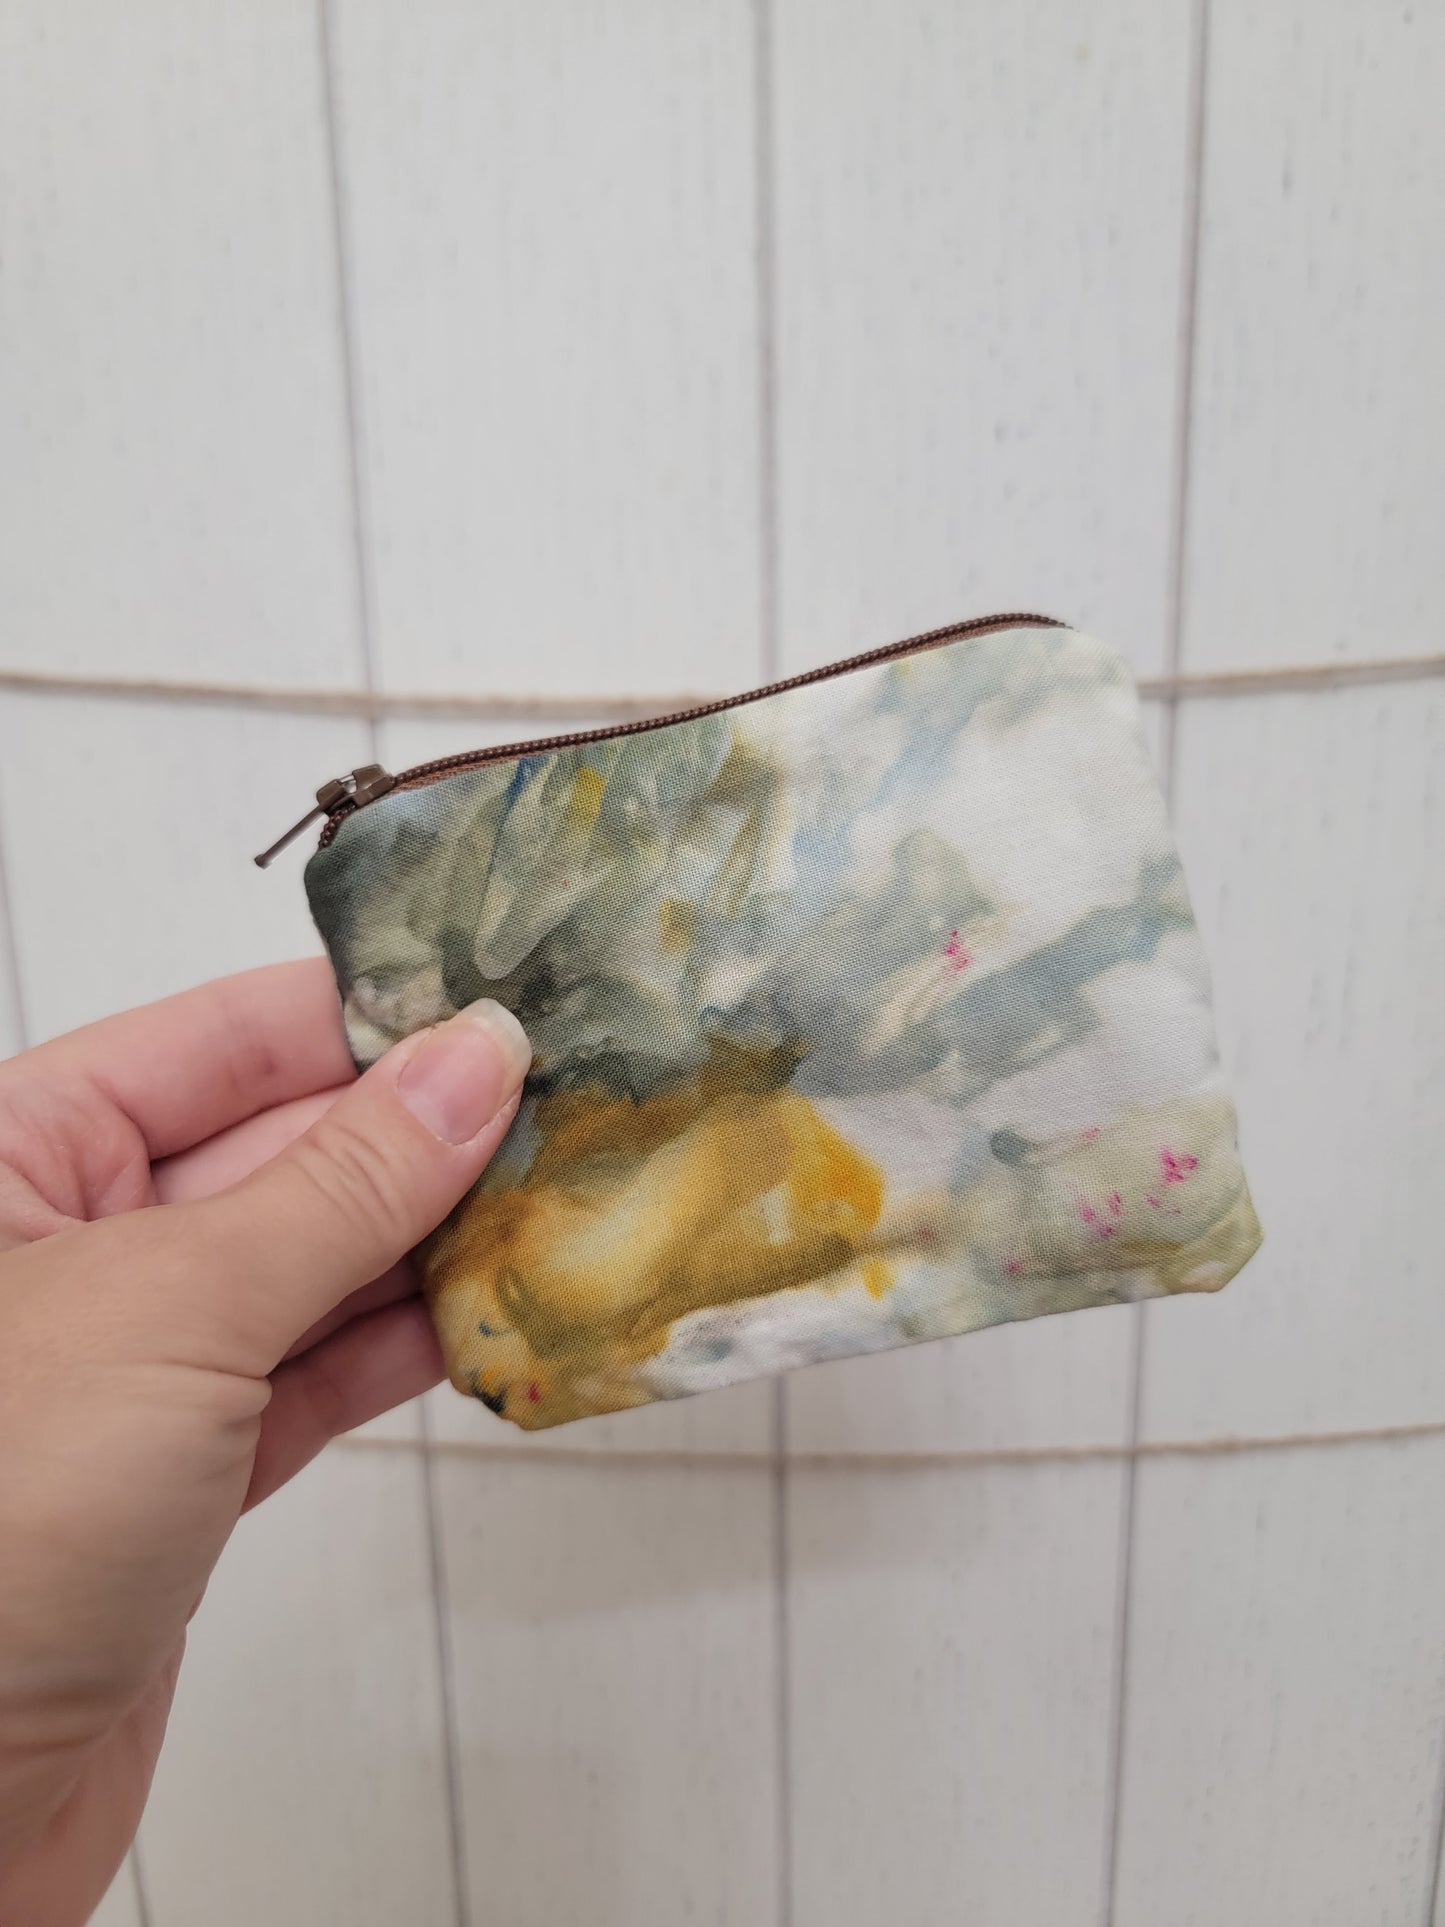 Dyed Coin Pouch